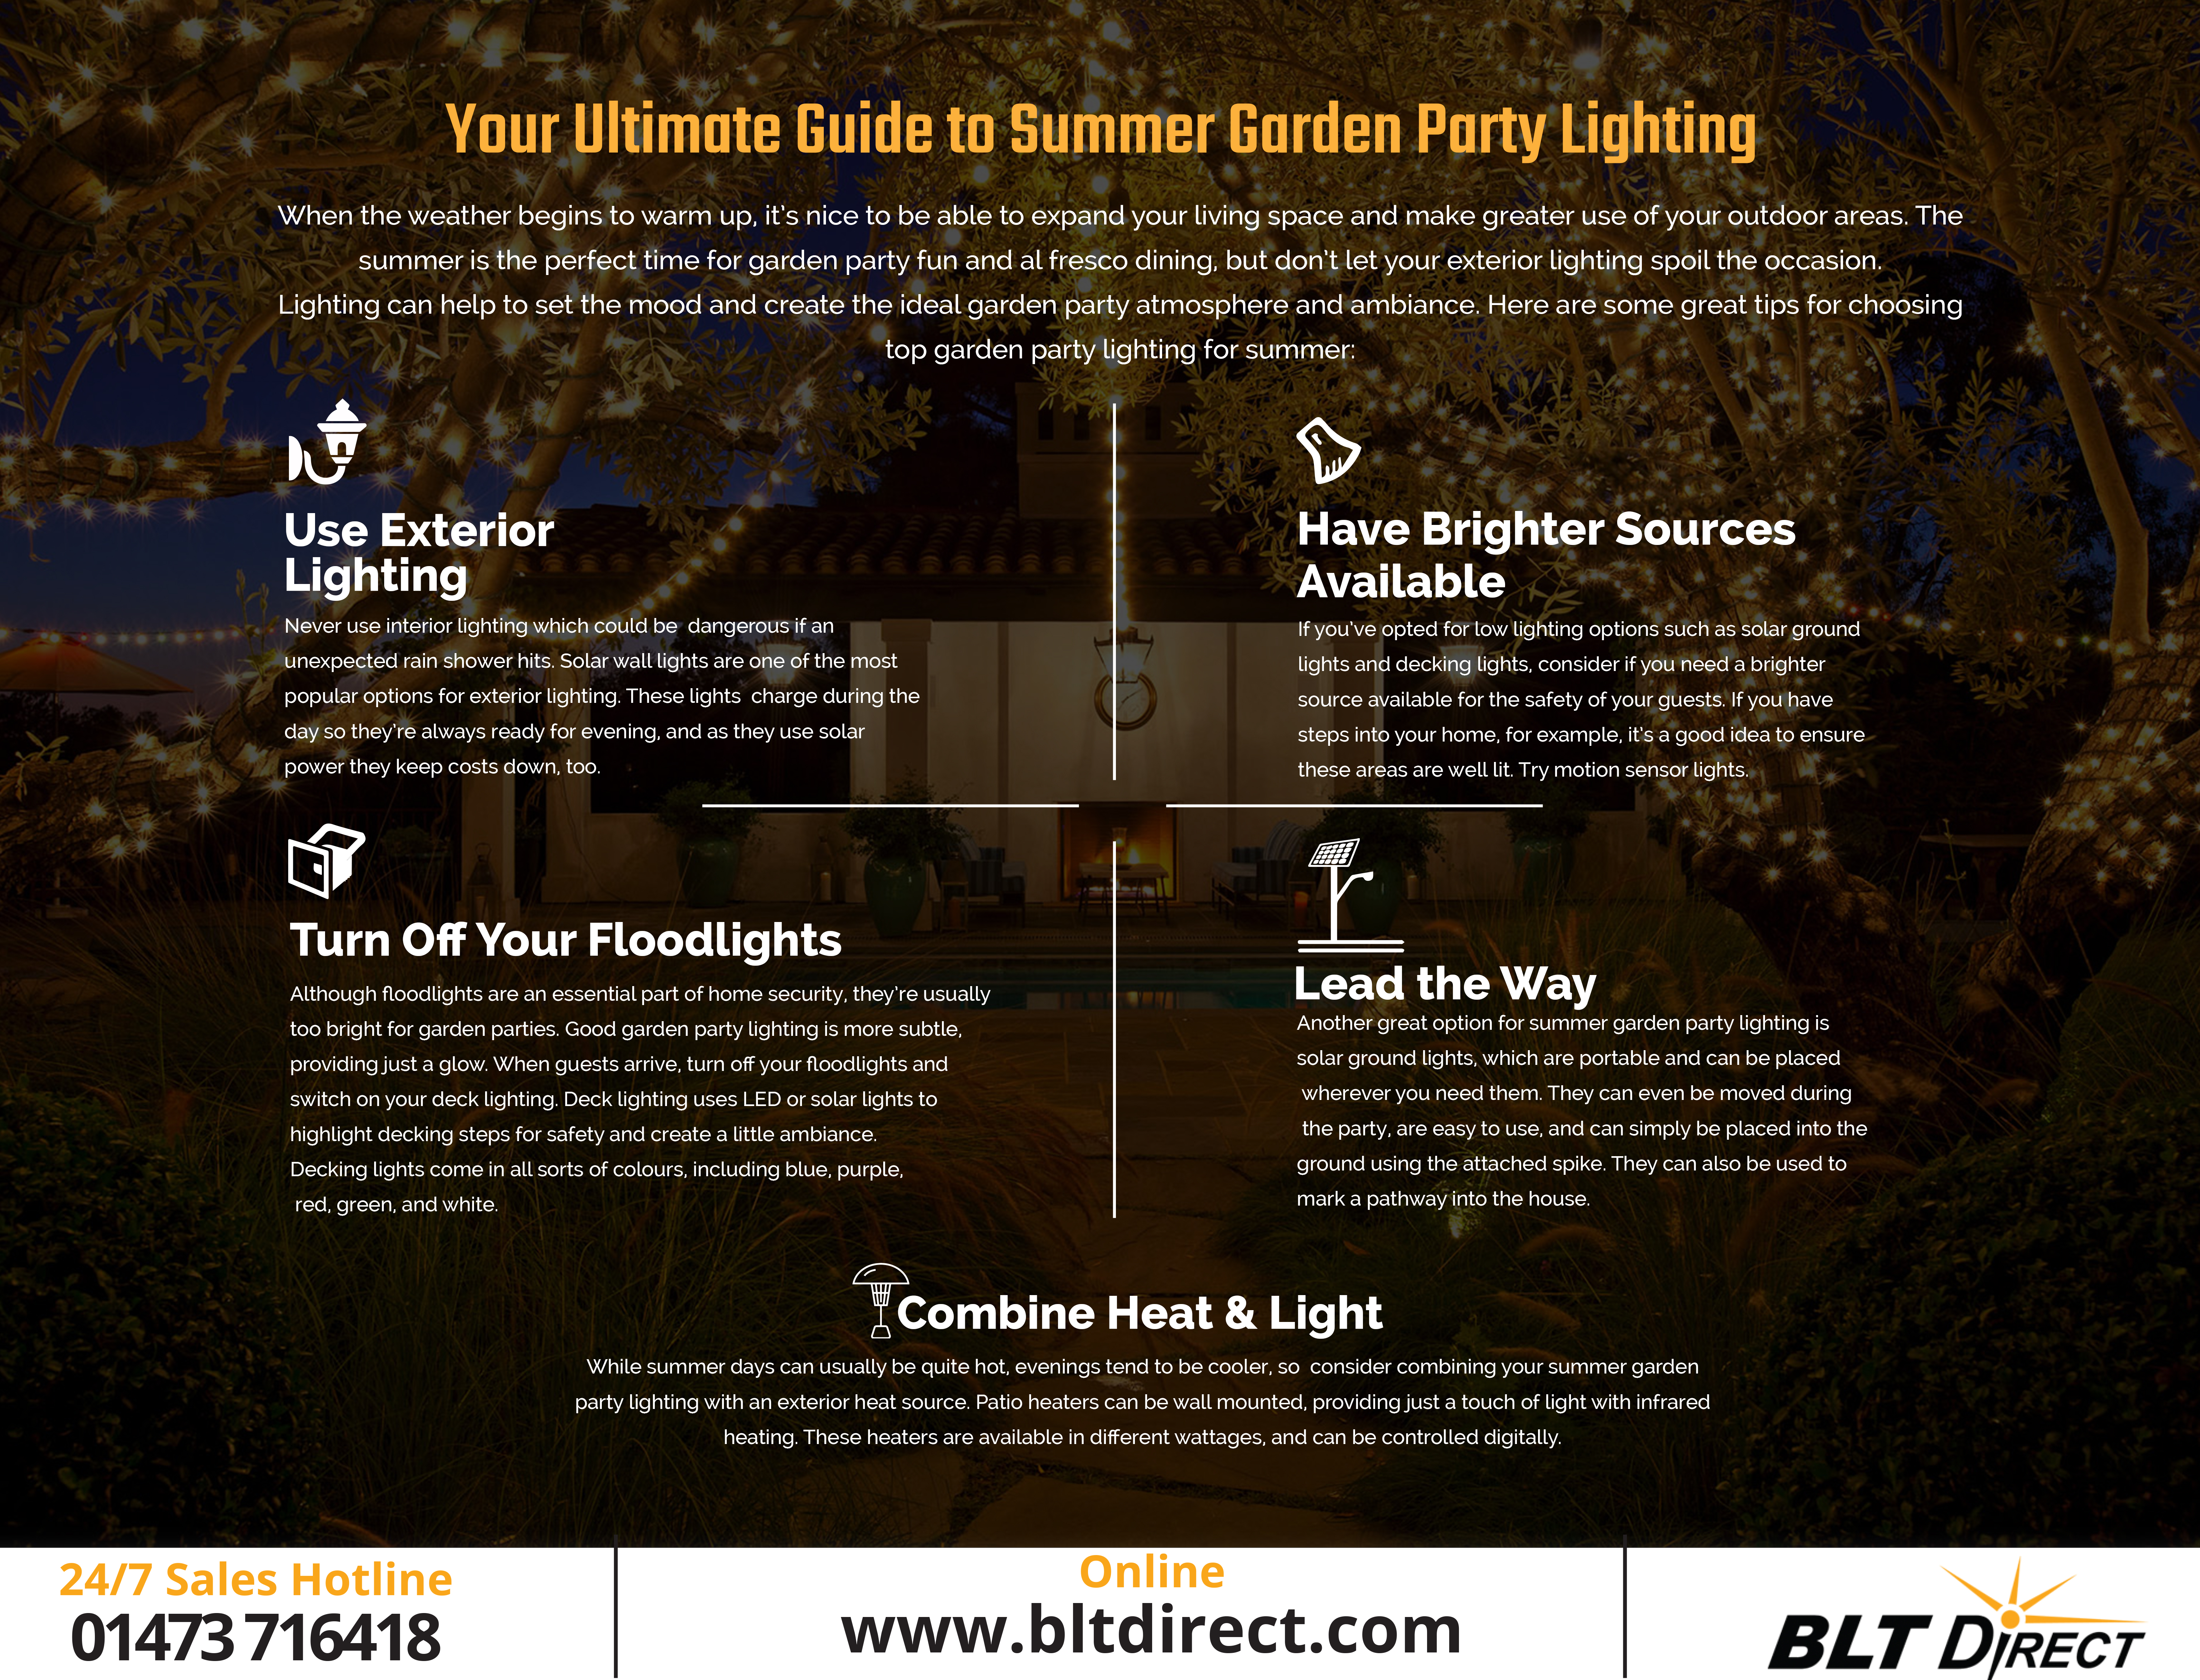 Your_Ultimate_Guide_to_Summer_Garden_Party_Lighting--1-